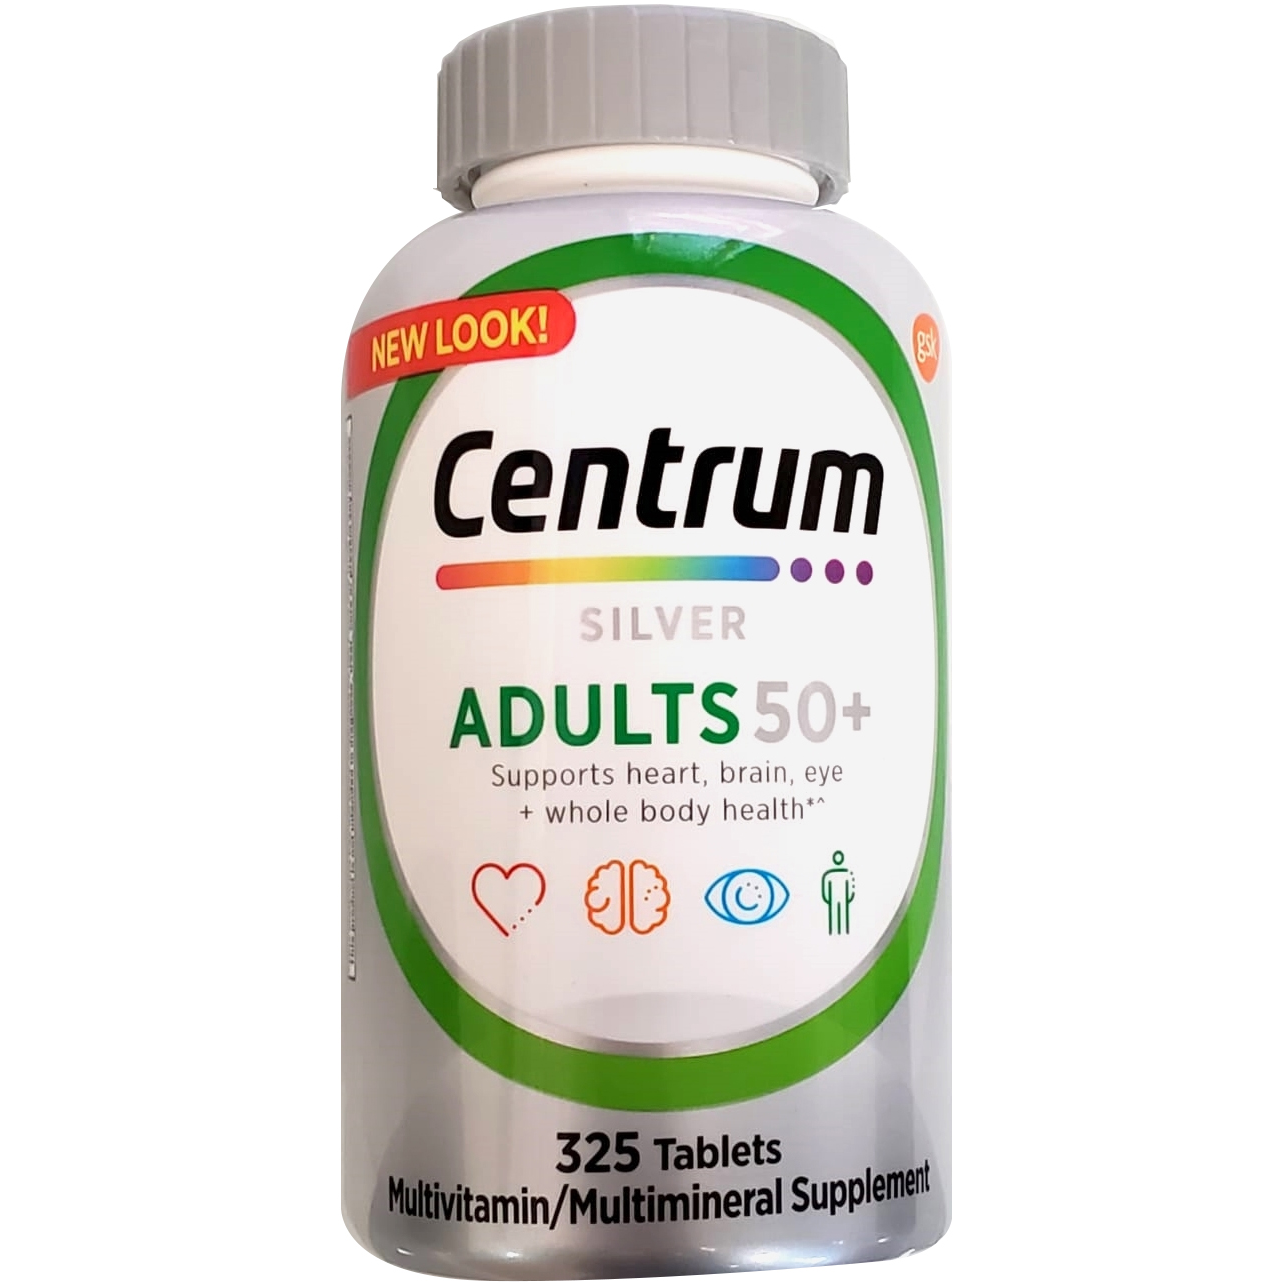 Centrum Silver - Adults 50+ / 325 Tablets  (Multivitamins Mineral For Men/Women Adults 50+)